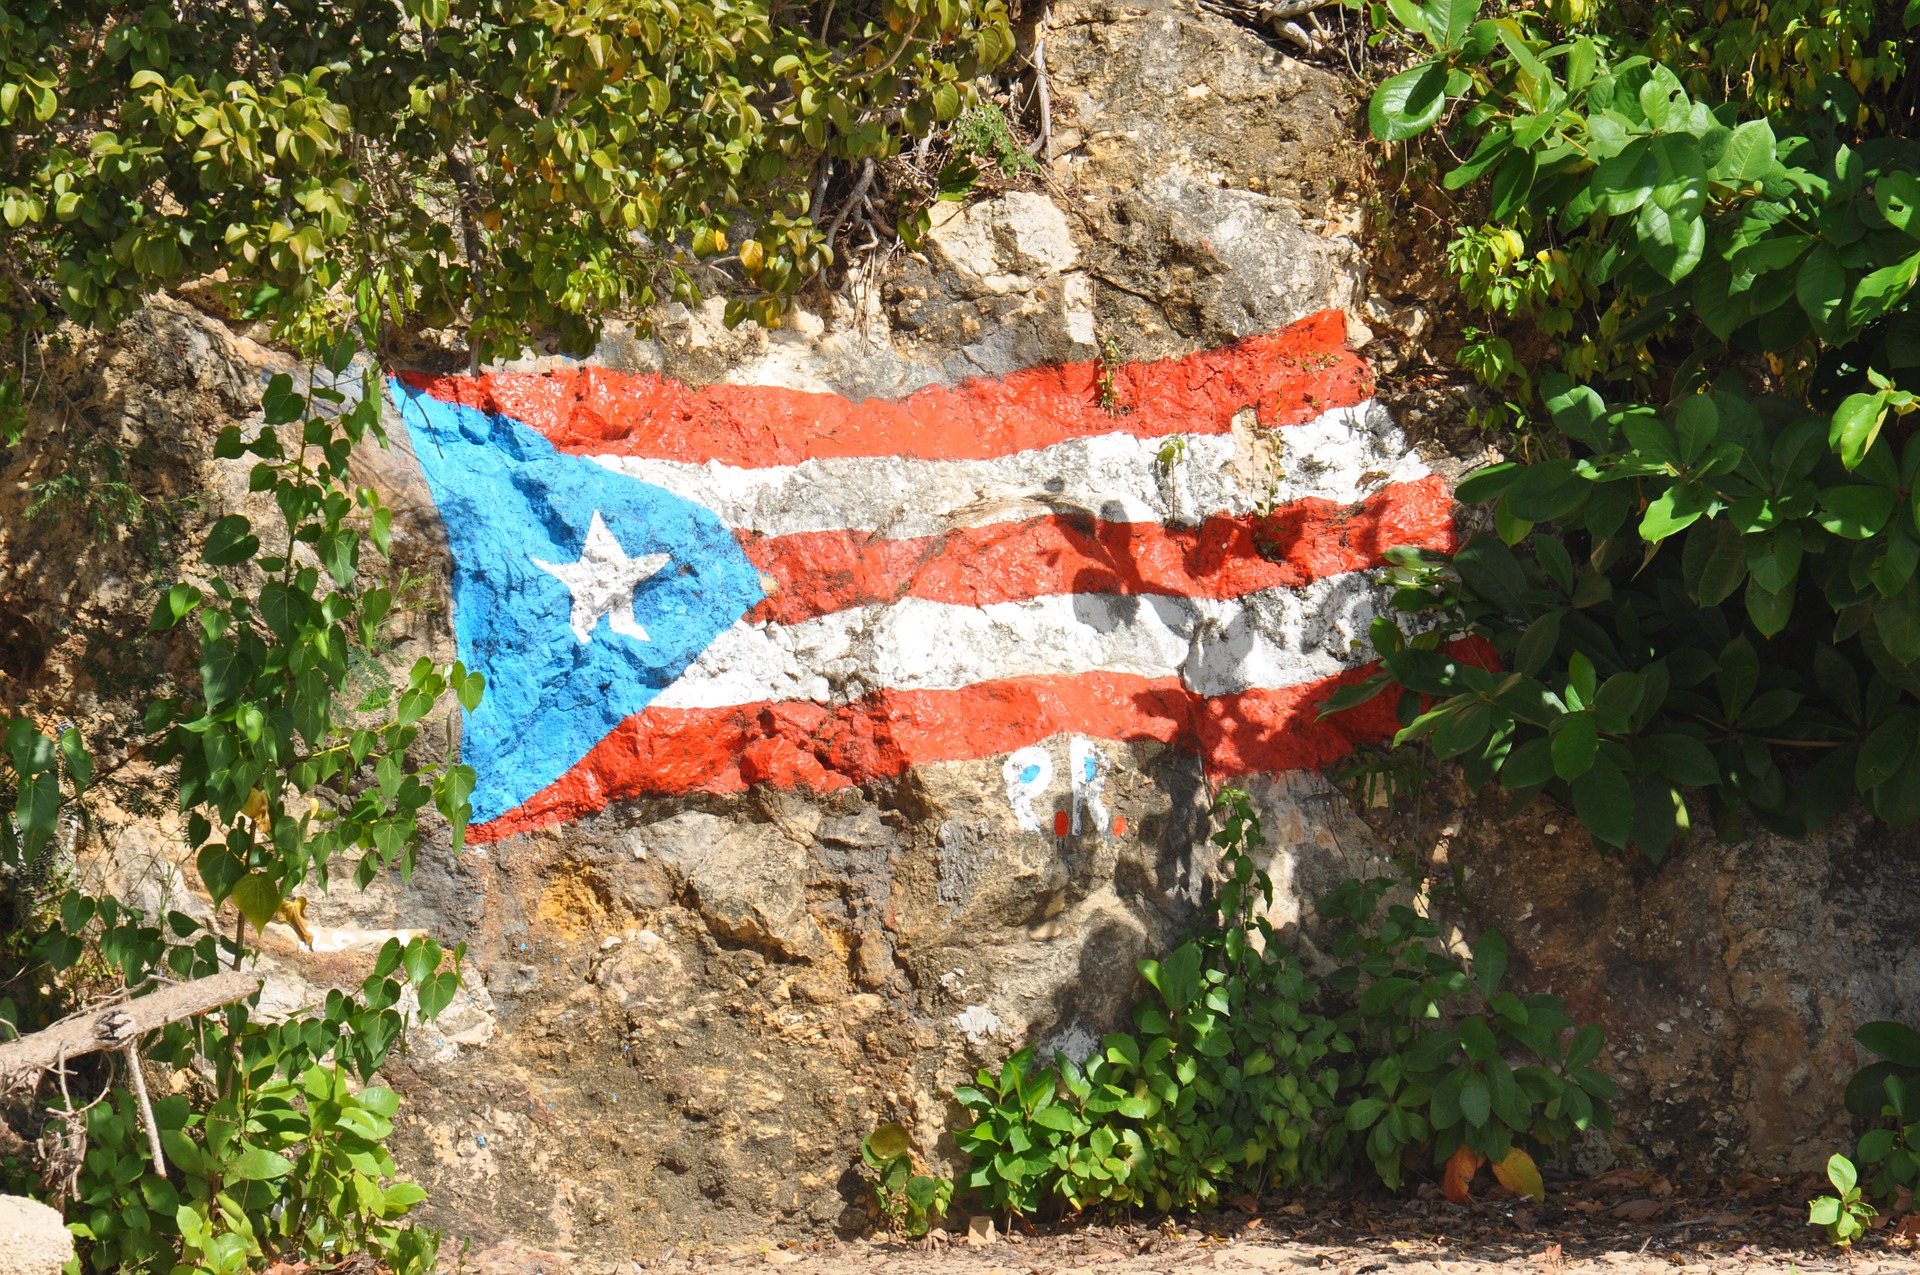 30 Puerto Rican Slang Terms That Only Make Sense In The ...